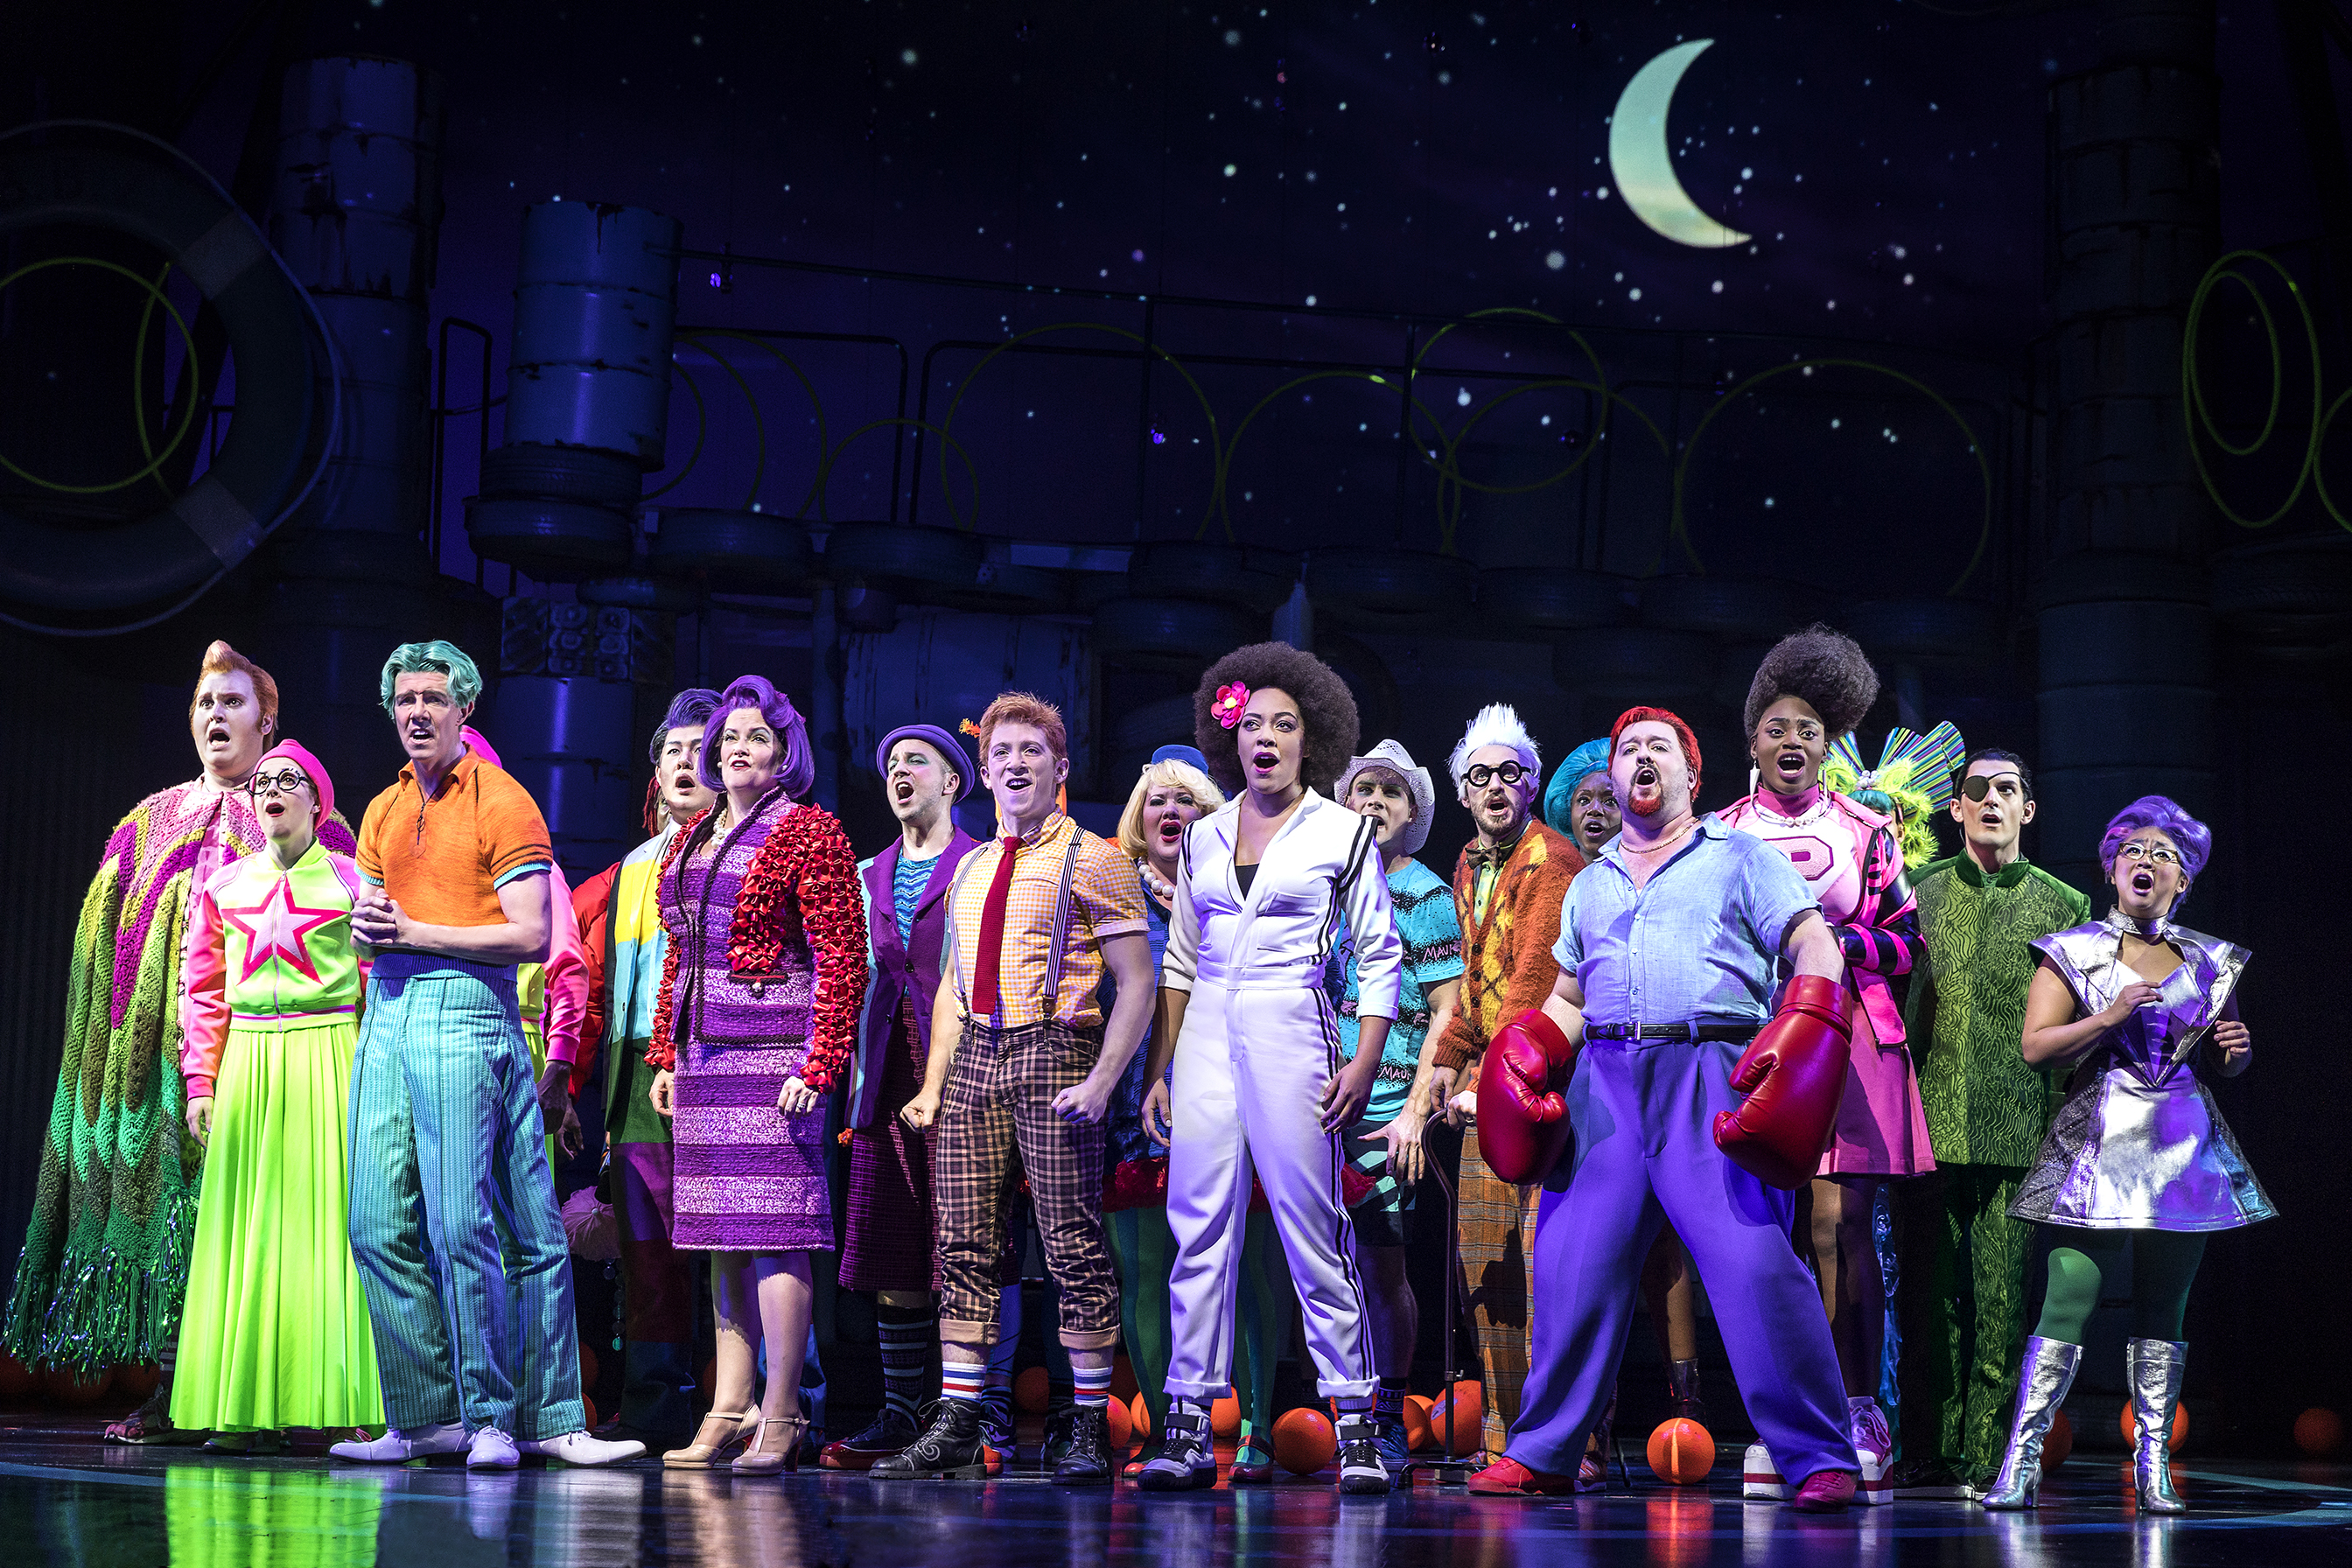 The cast of Spongebob Squarepants the Broadway Musical. Photography by Joan Marcus.